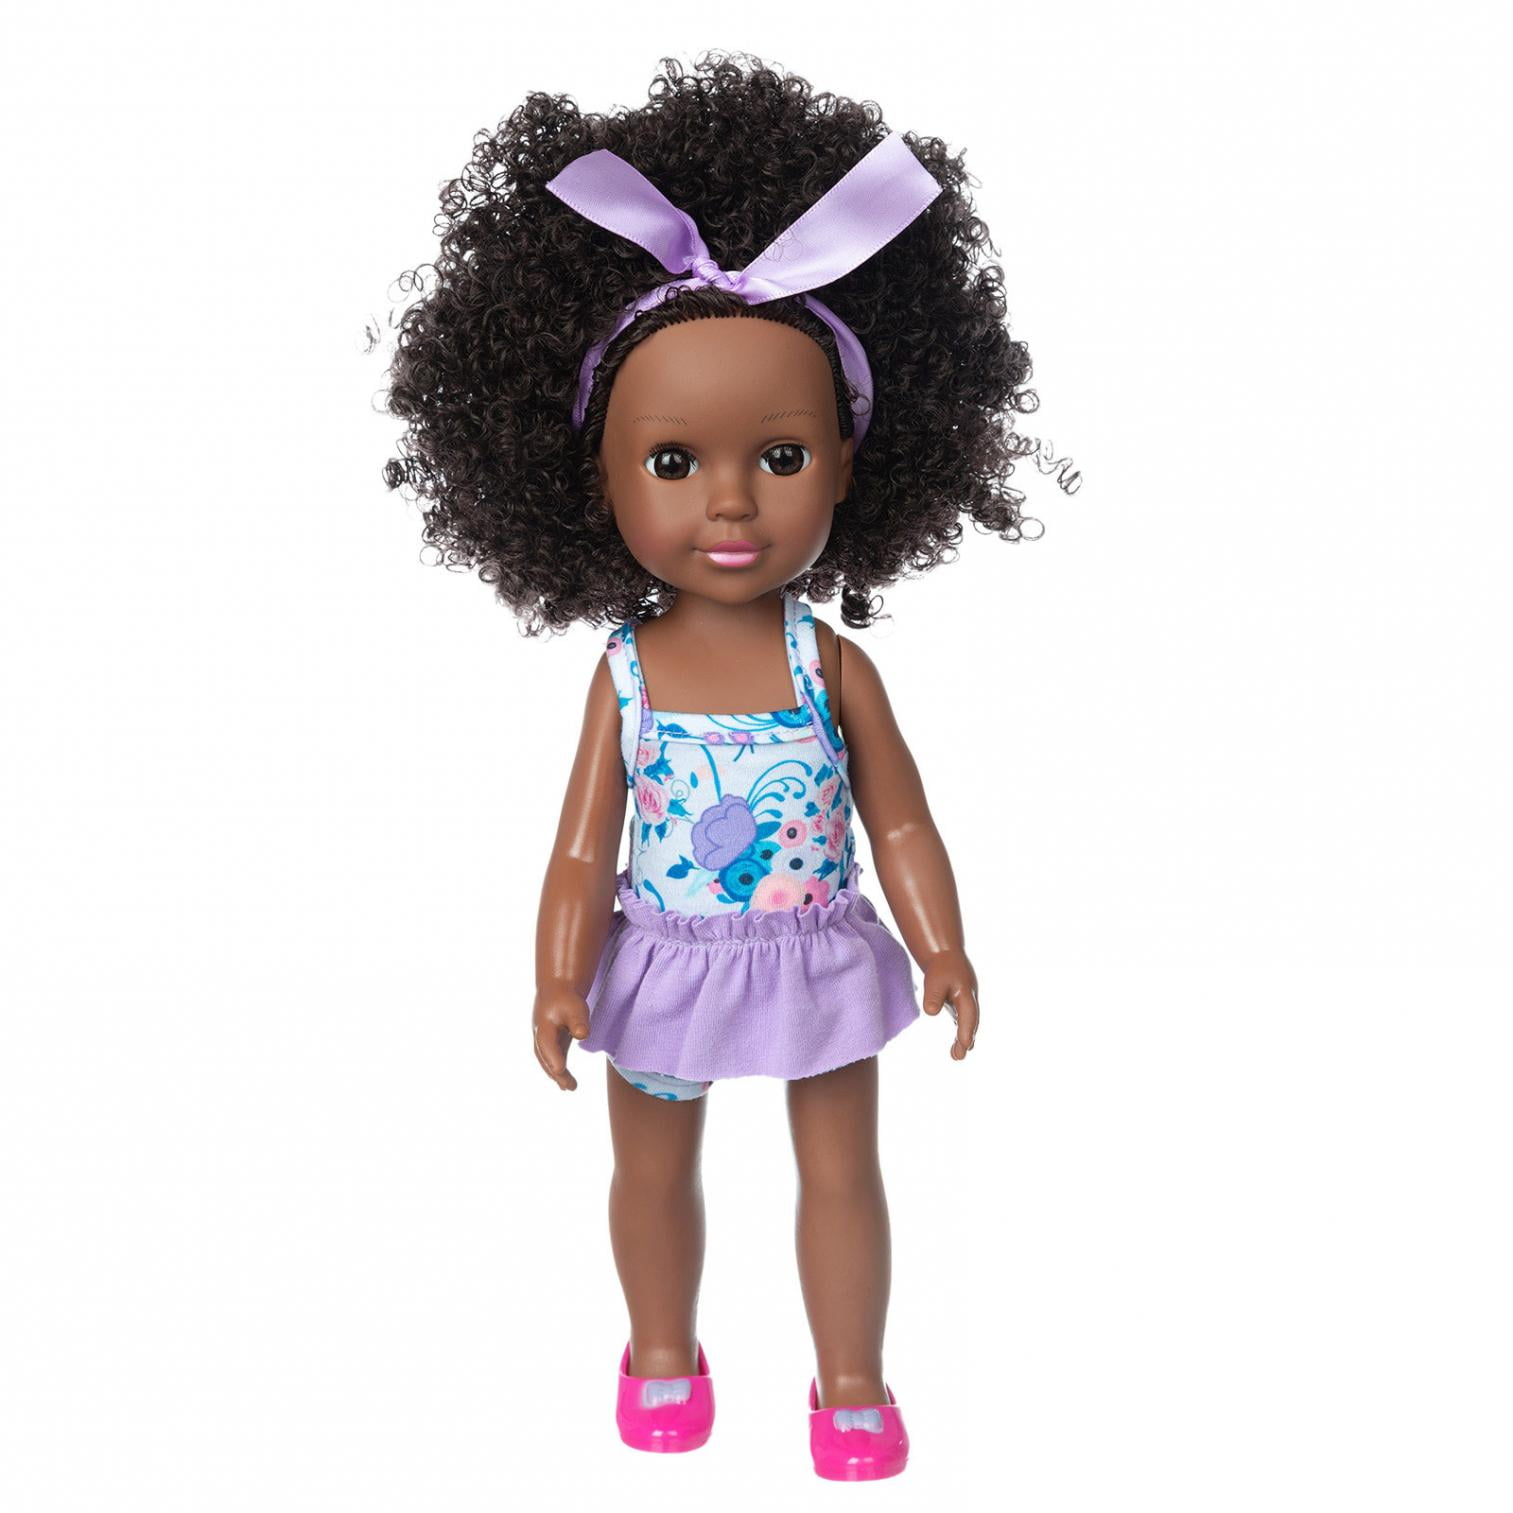 Black African American Washable Soft Reborn Doll Kids Girl Holiday Birthday Gift 